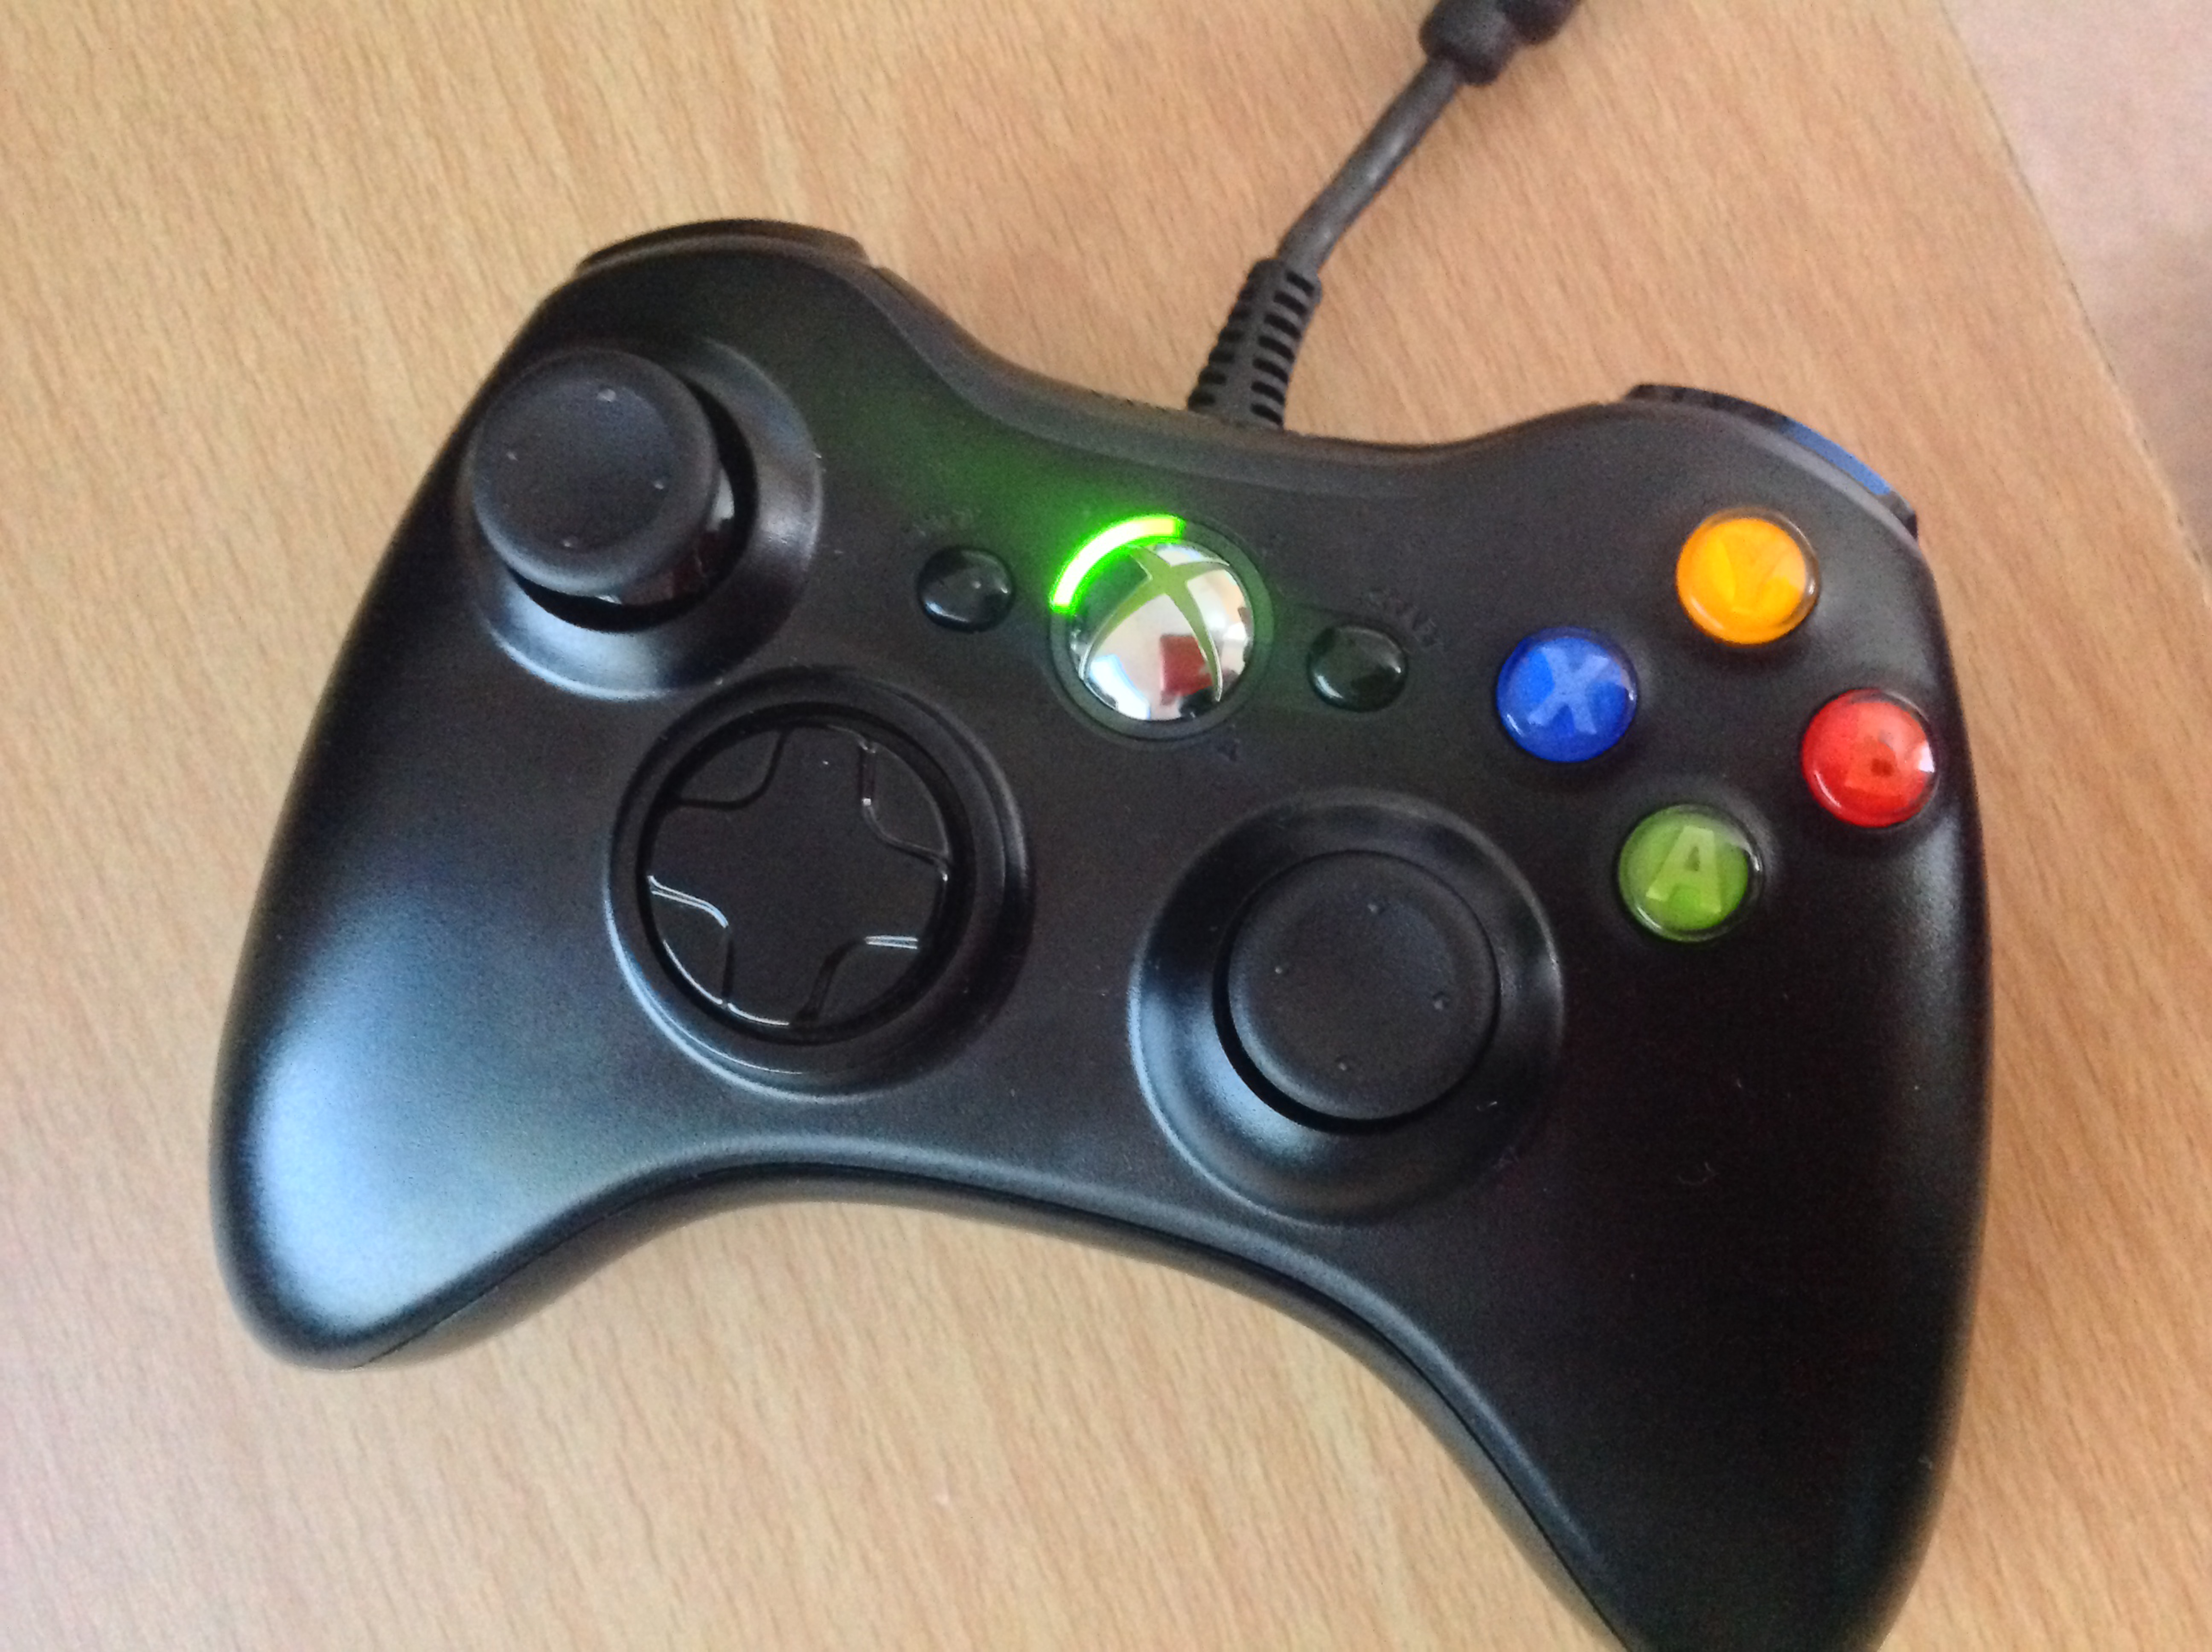 xbox 360 controller driver for windows 10 download